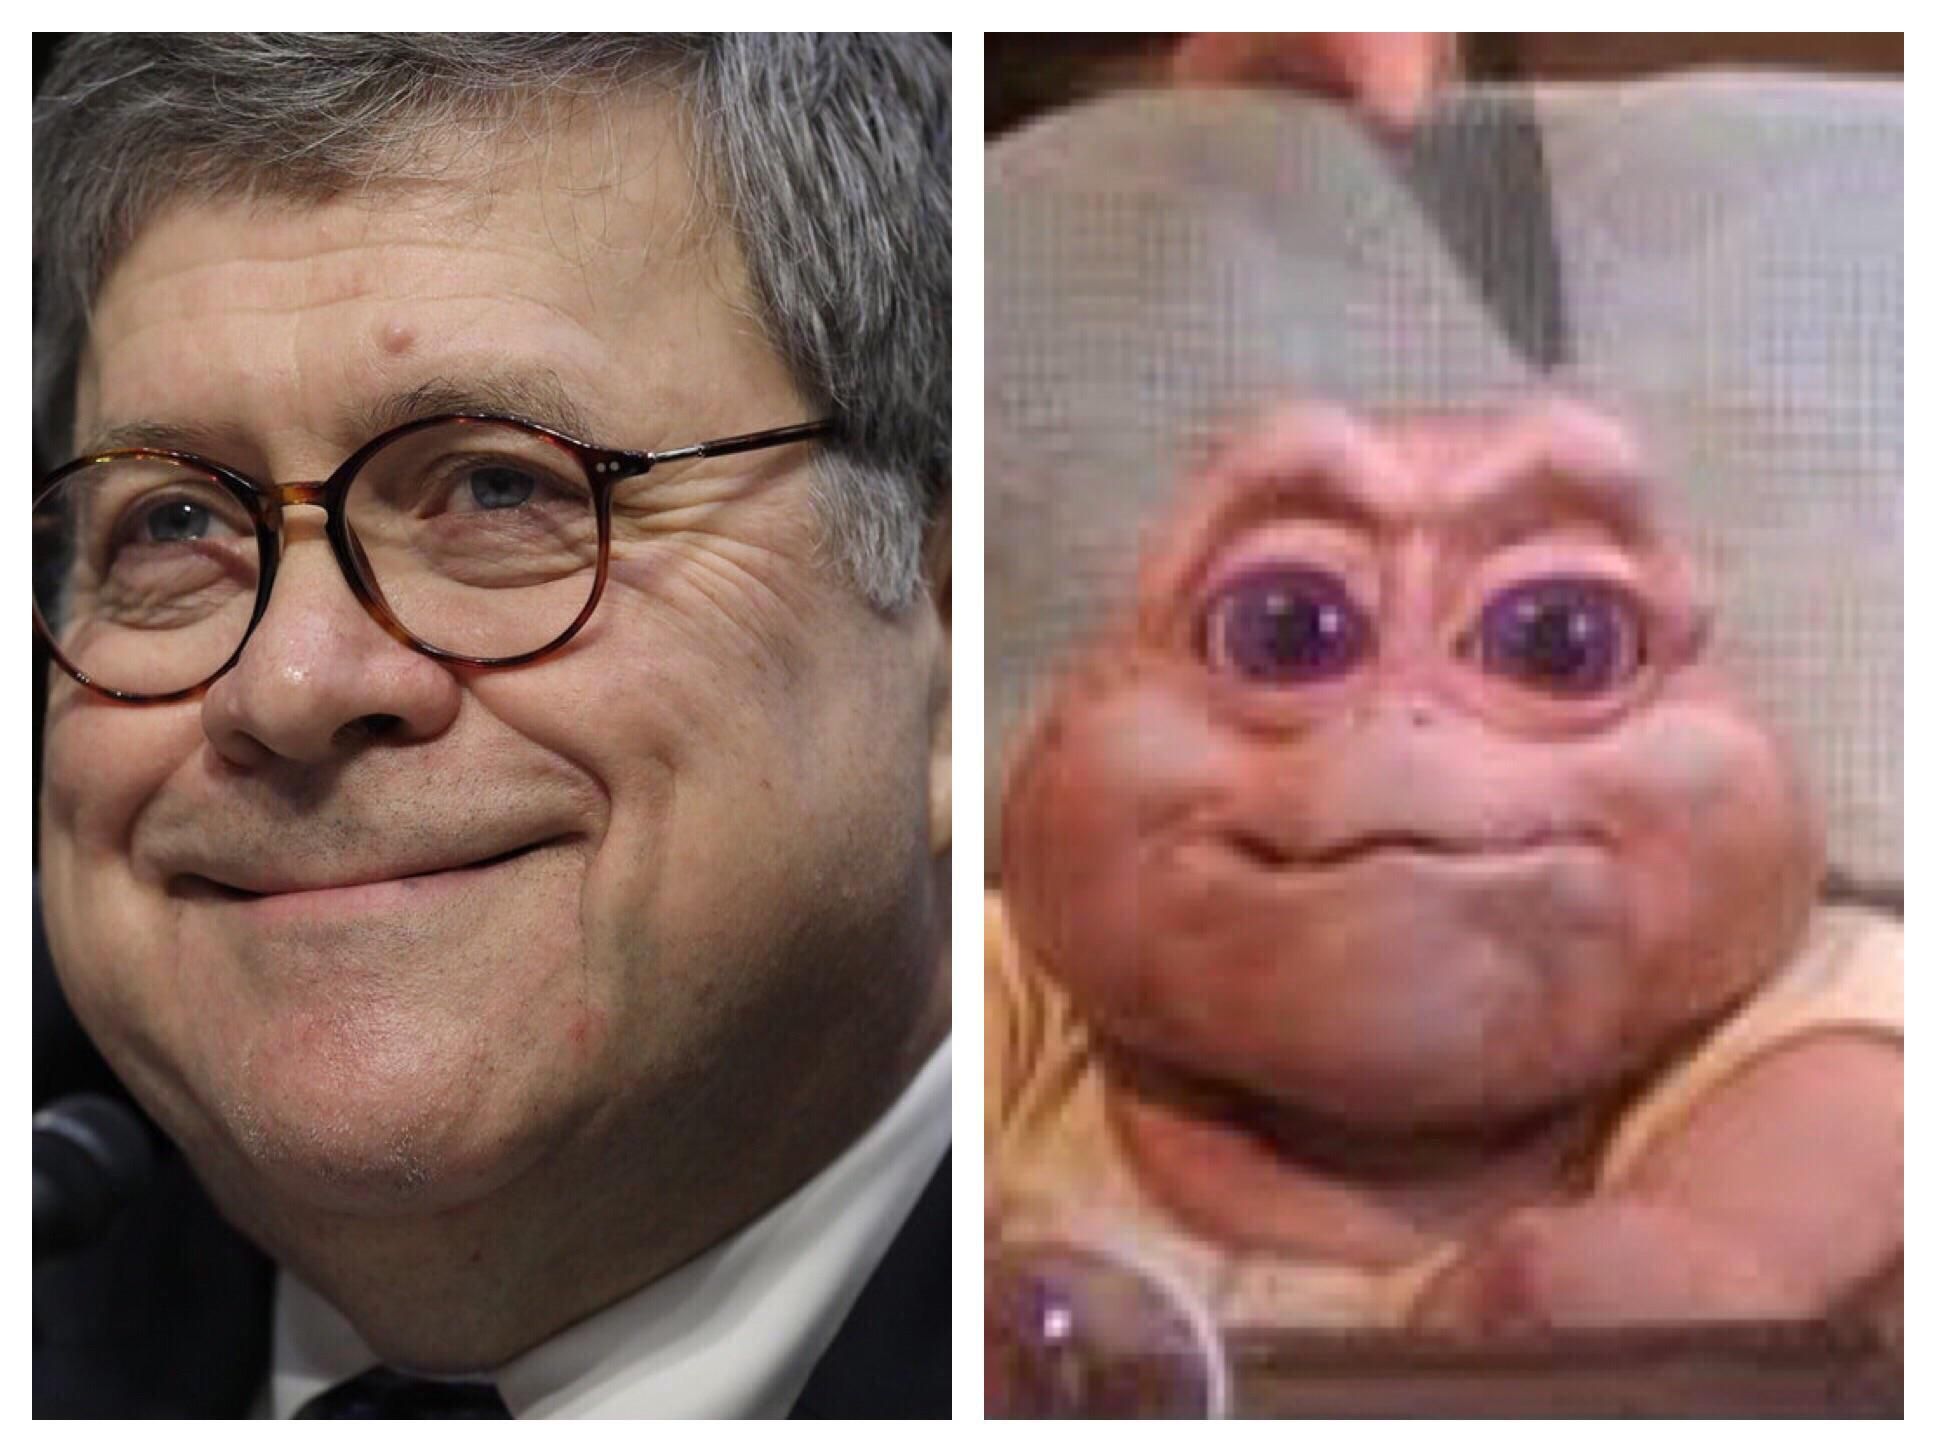 Is it just me or does Bill Barr look like a grown-up Baby Sinclair?